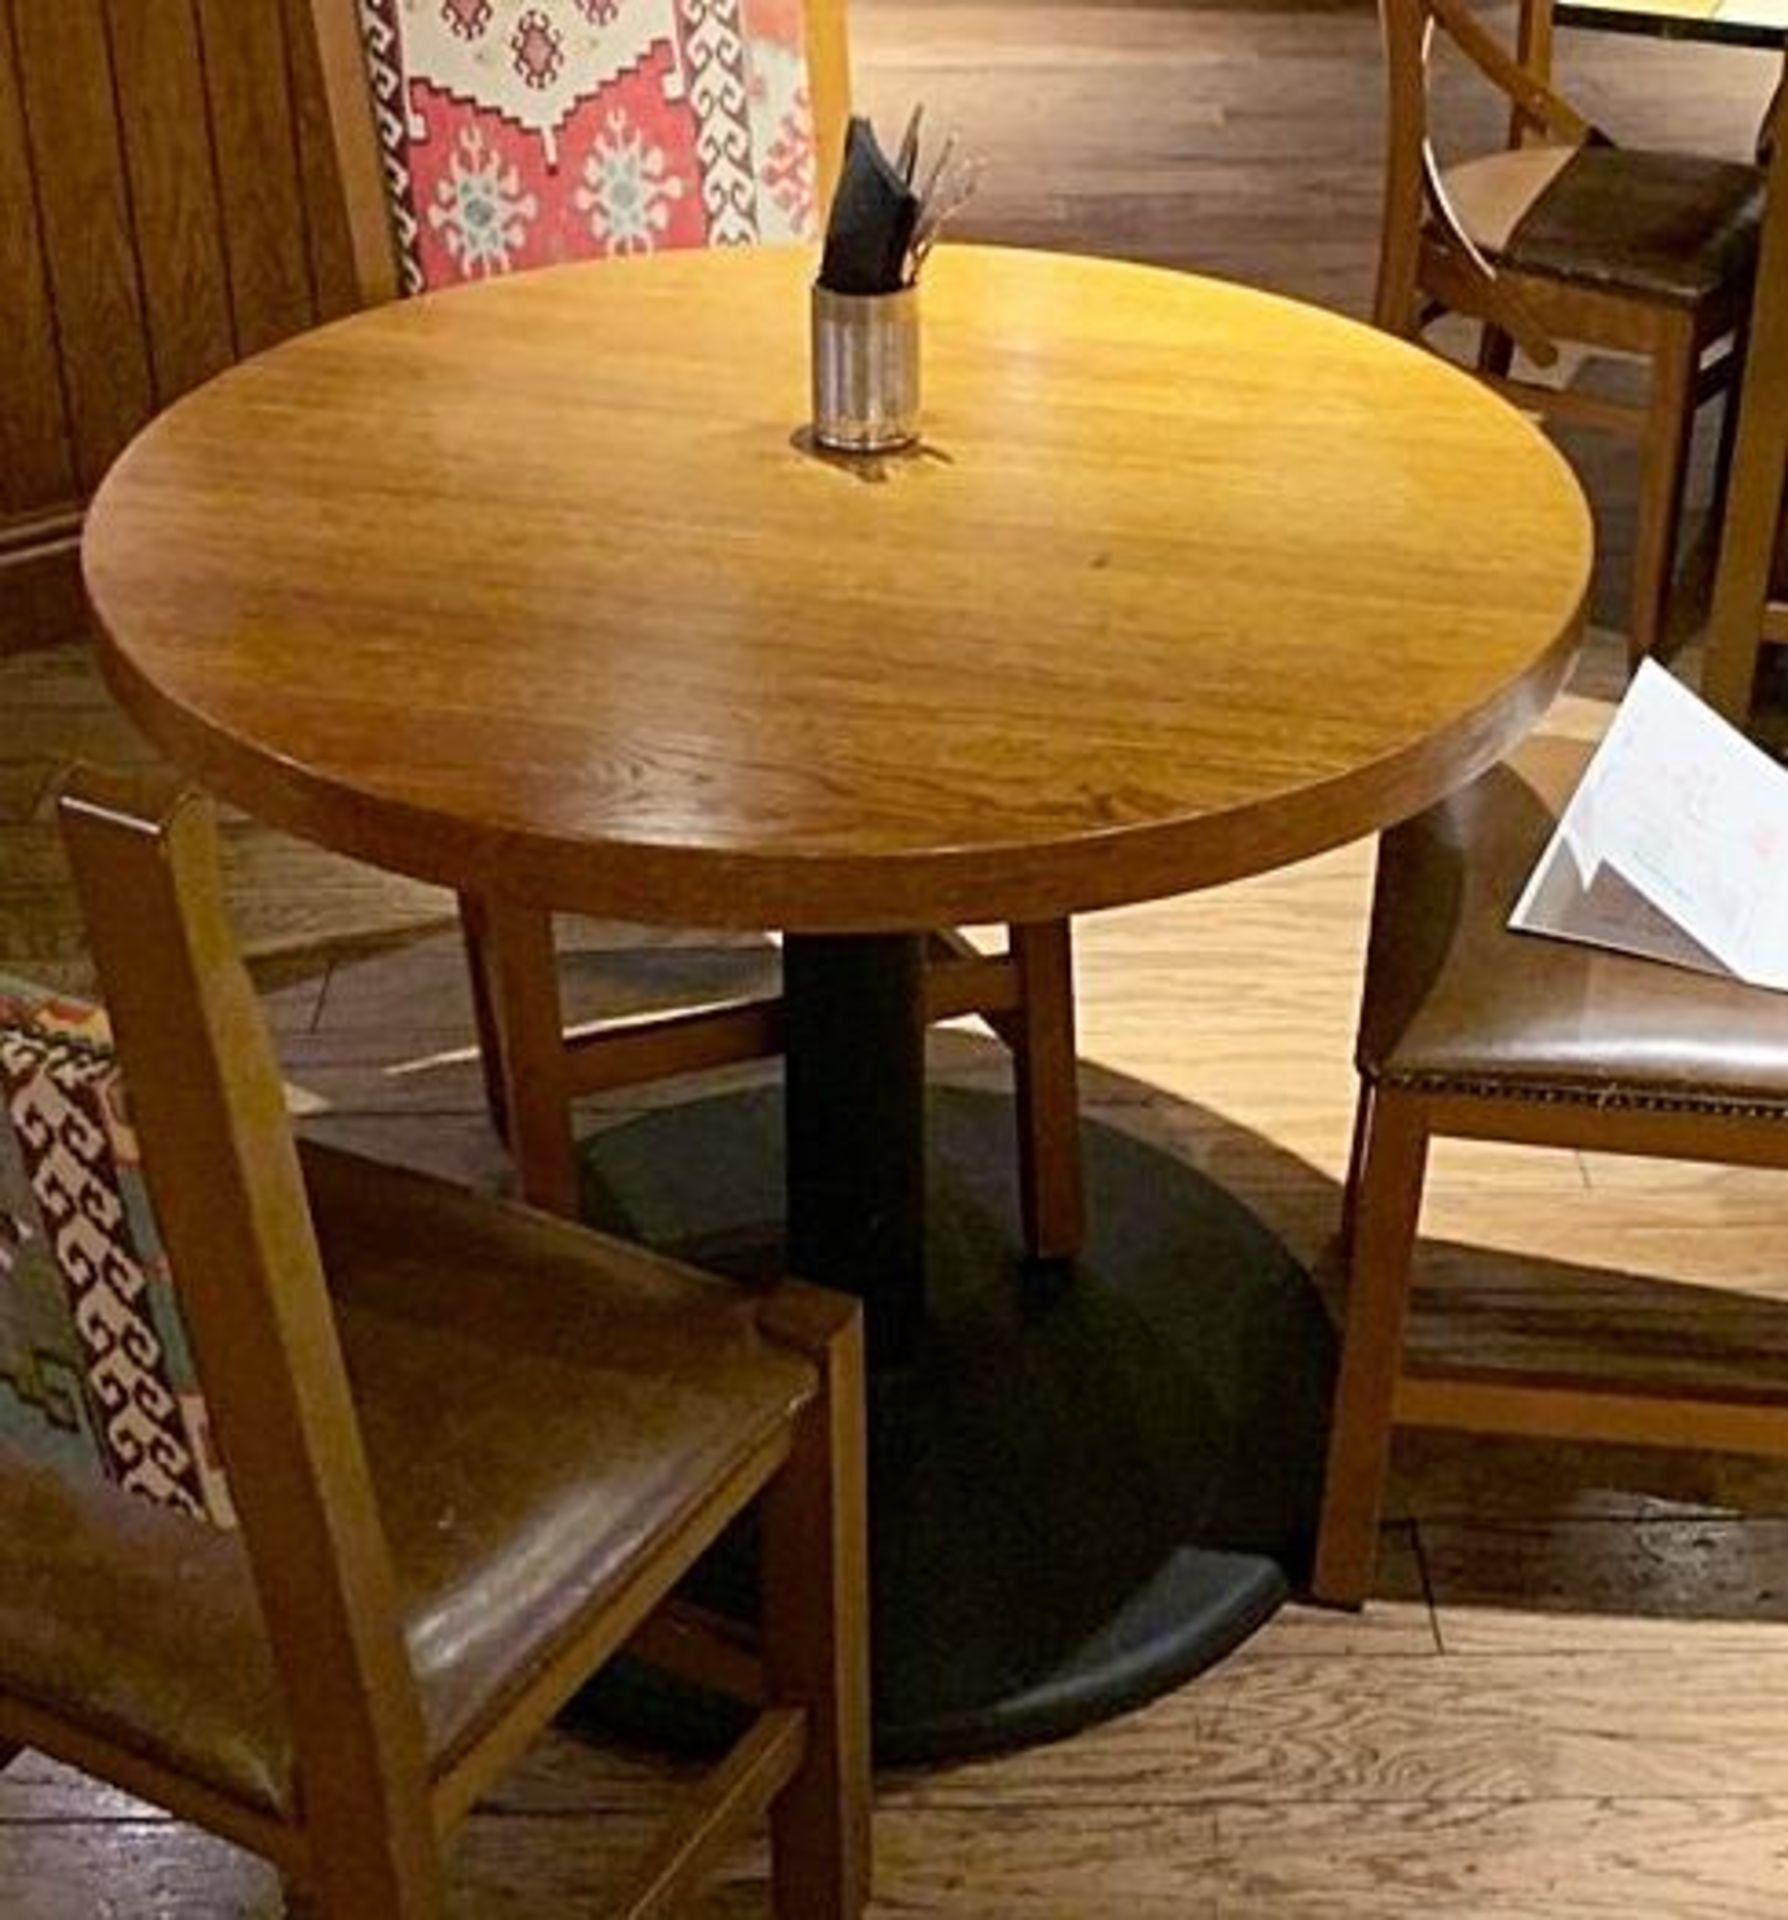 1 x Medium Circular Wood And Metal Table - Dimensions: W95cm H75cm - CL339 - From a Popular Mexican - Image 2 of 2